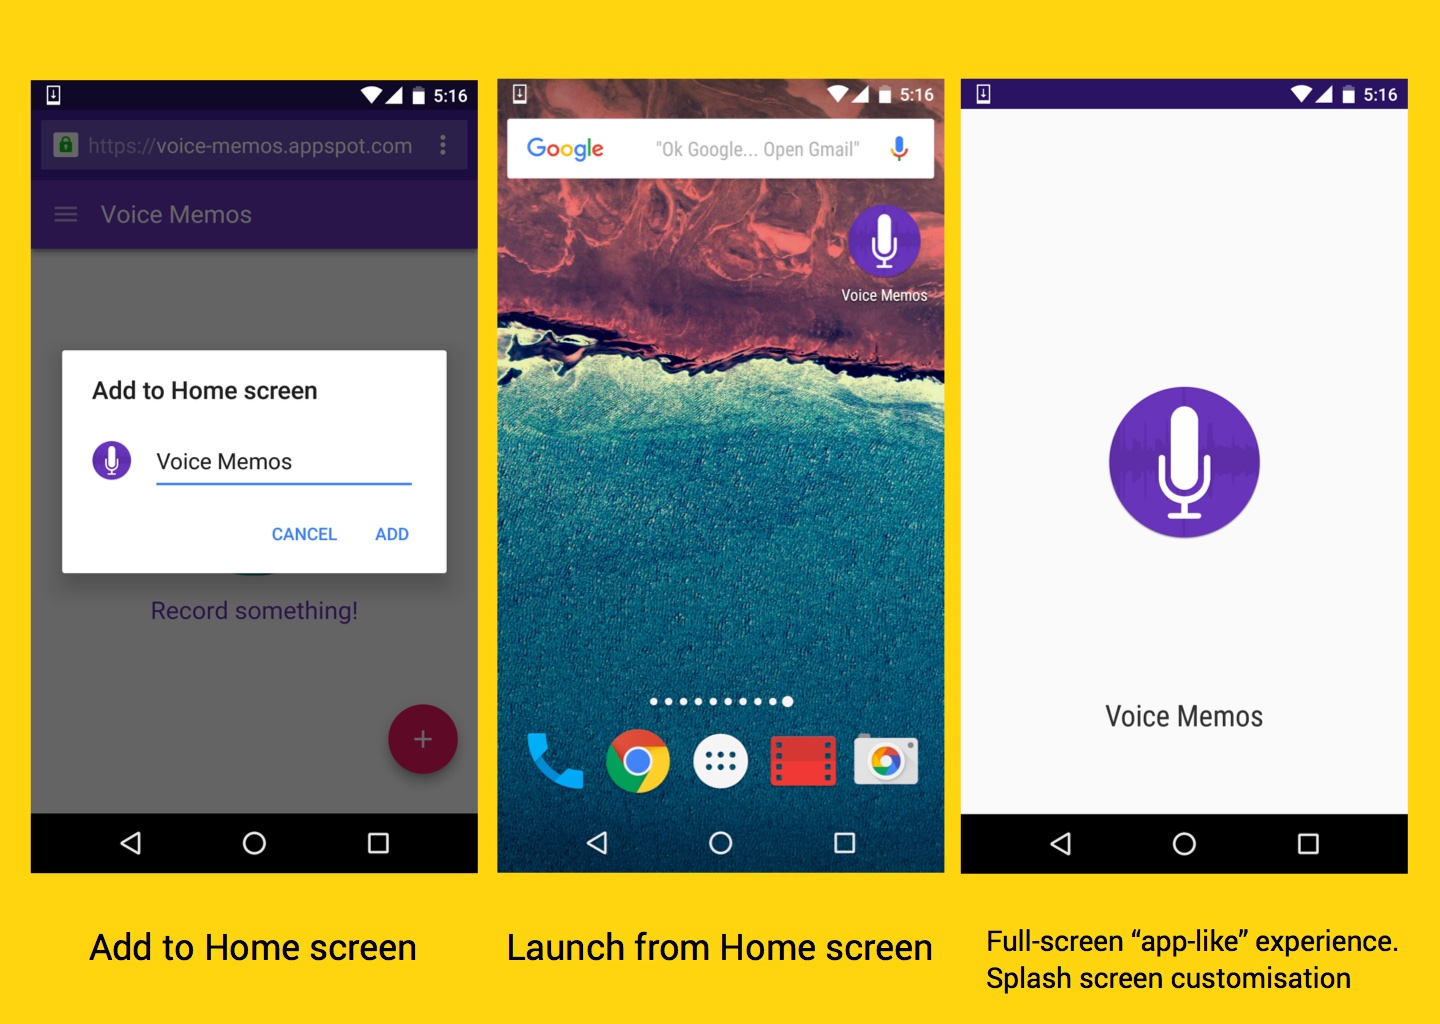 Add to homescreen, launch from homescreen and full-screen app-like experiences.